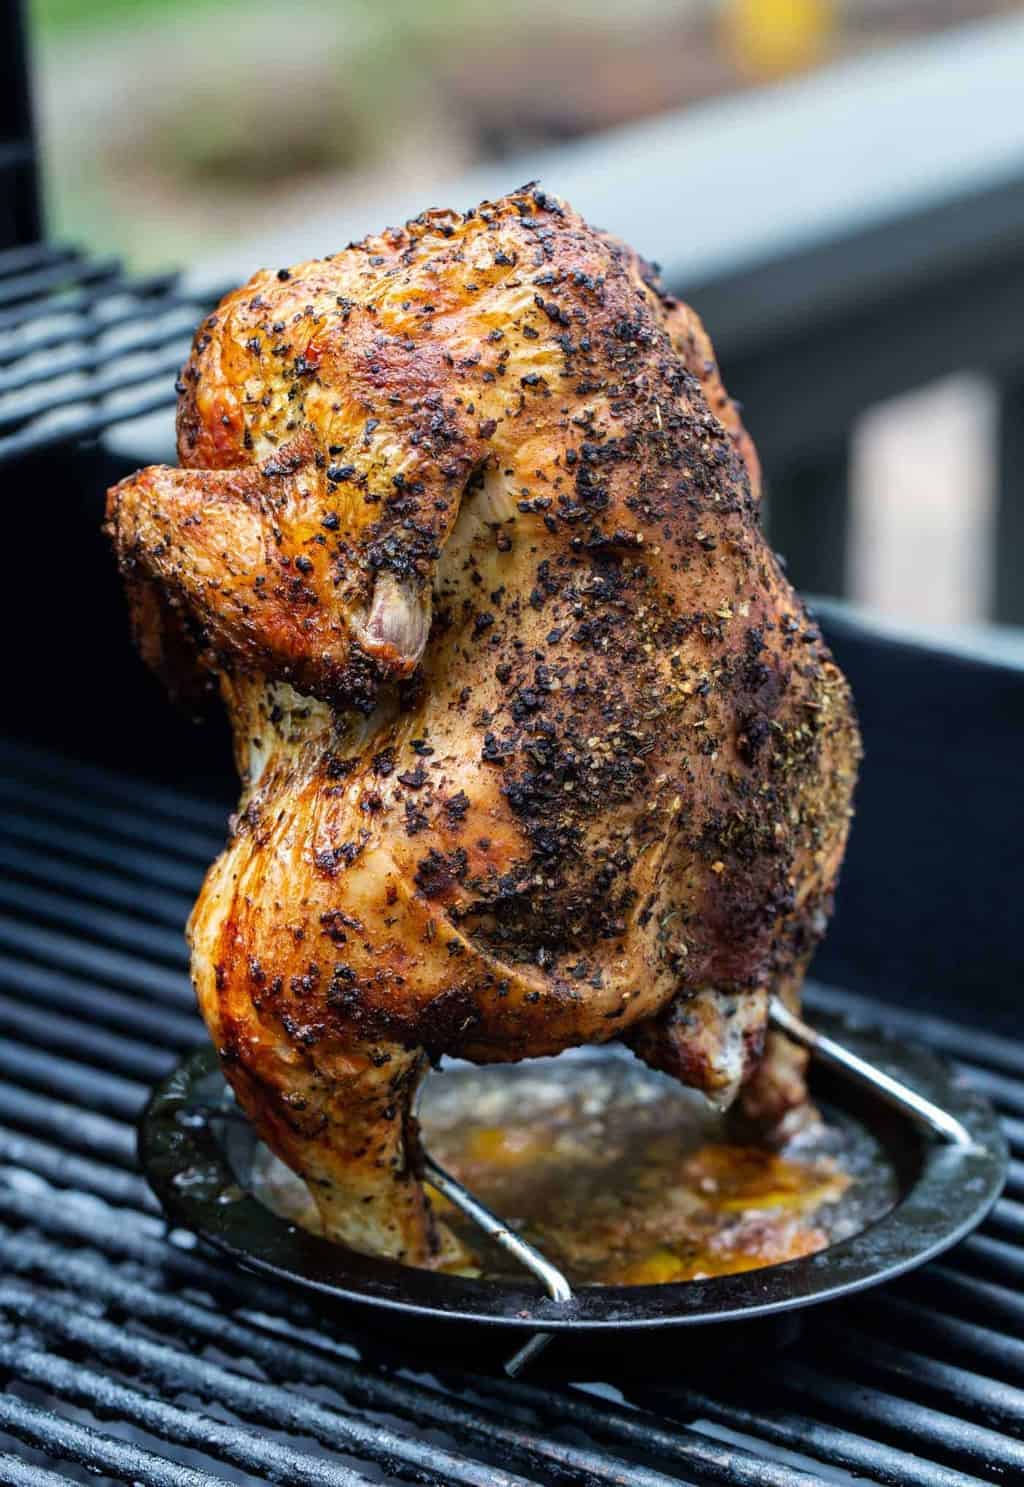  whole roasted chicken on a vertical roaster on grill.